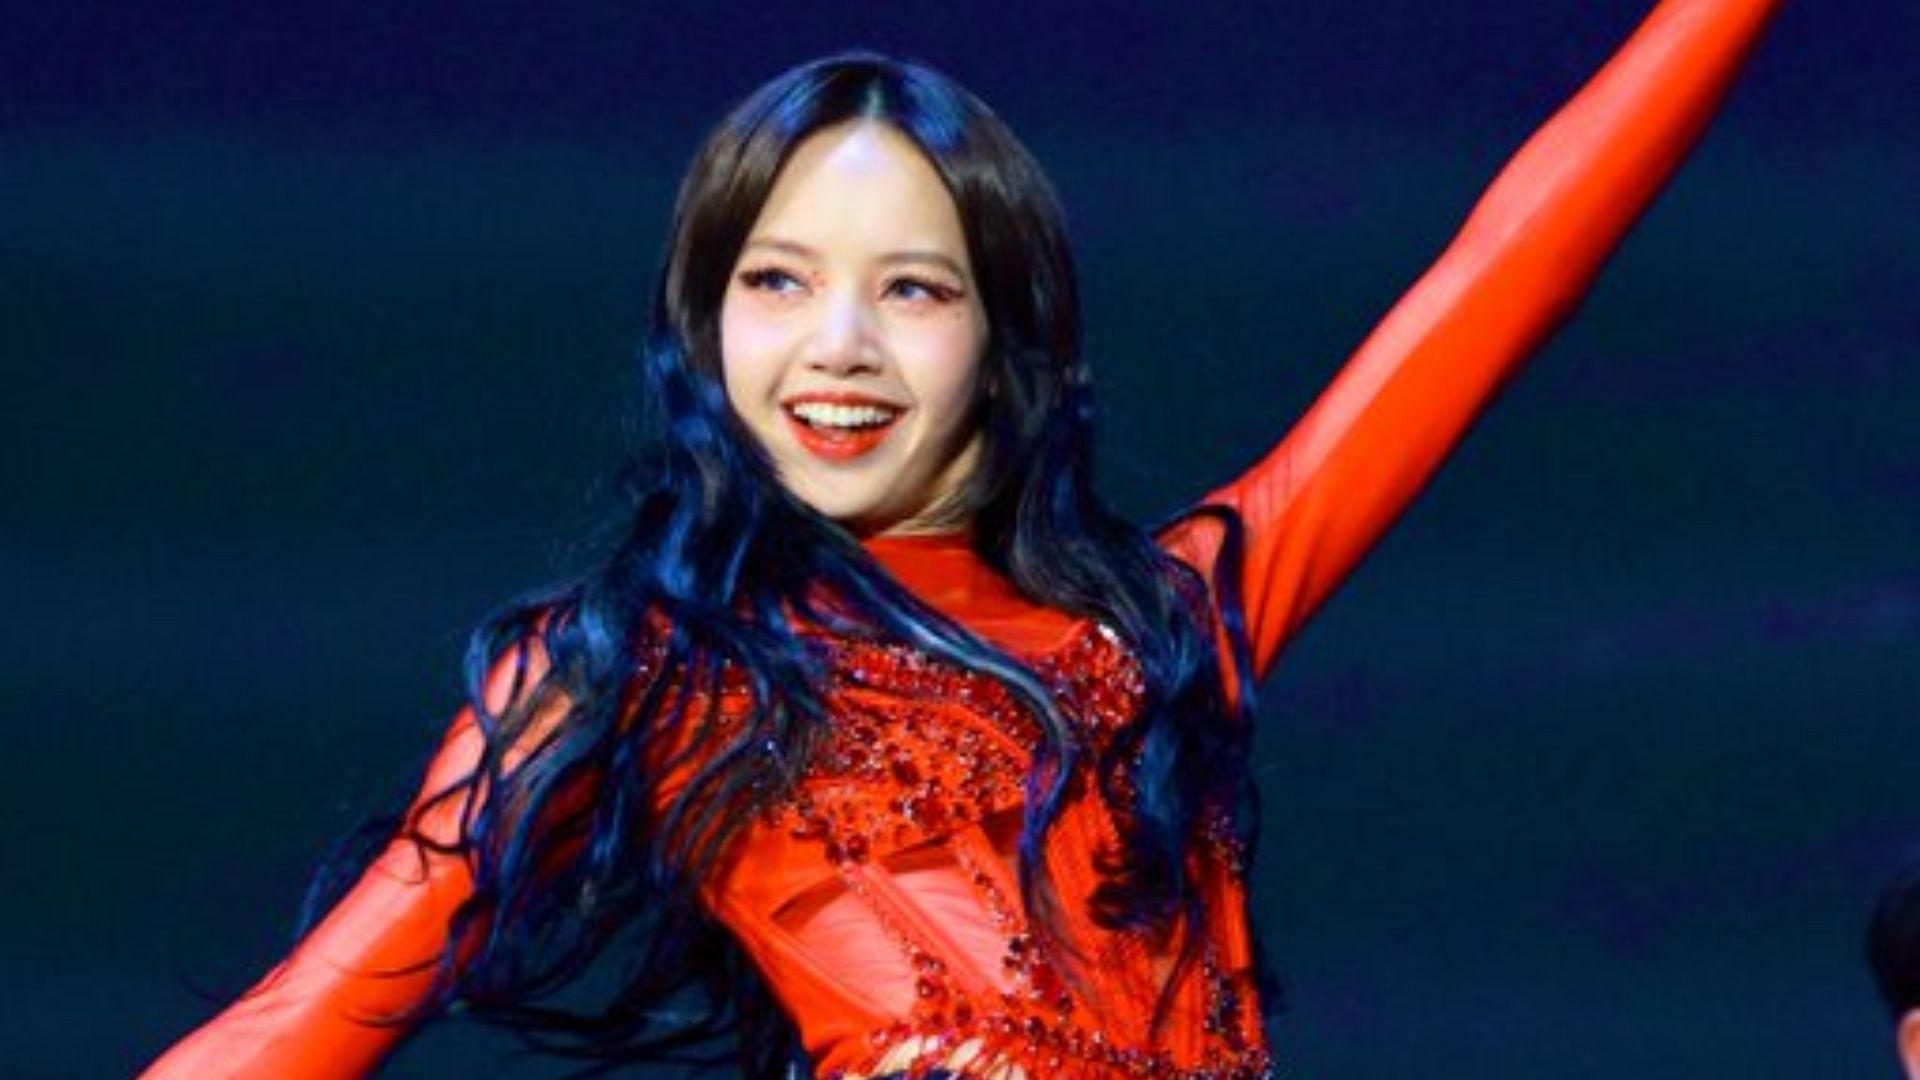 He already has a girlfriend”: BLACKPINK's Lisa's fans have mixed reactions  to her allegedly dating TAG Heuer's CEO Frederic Arnault